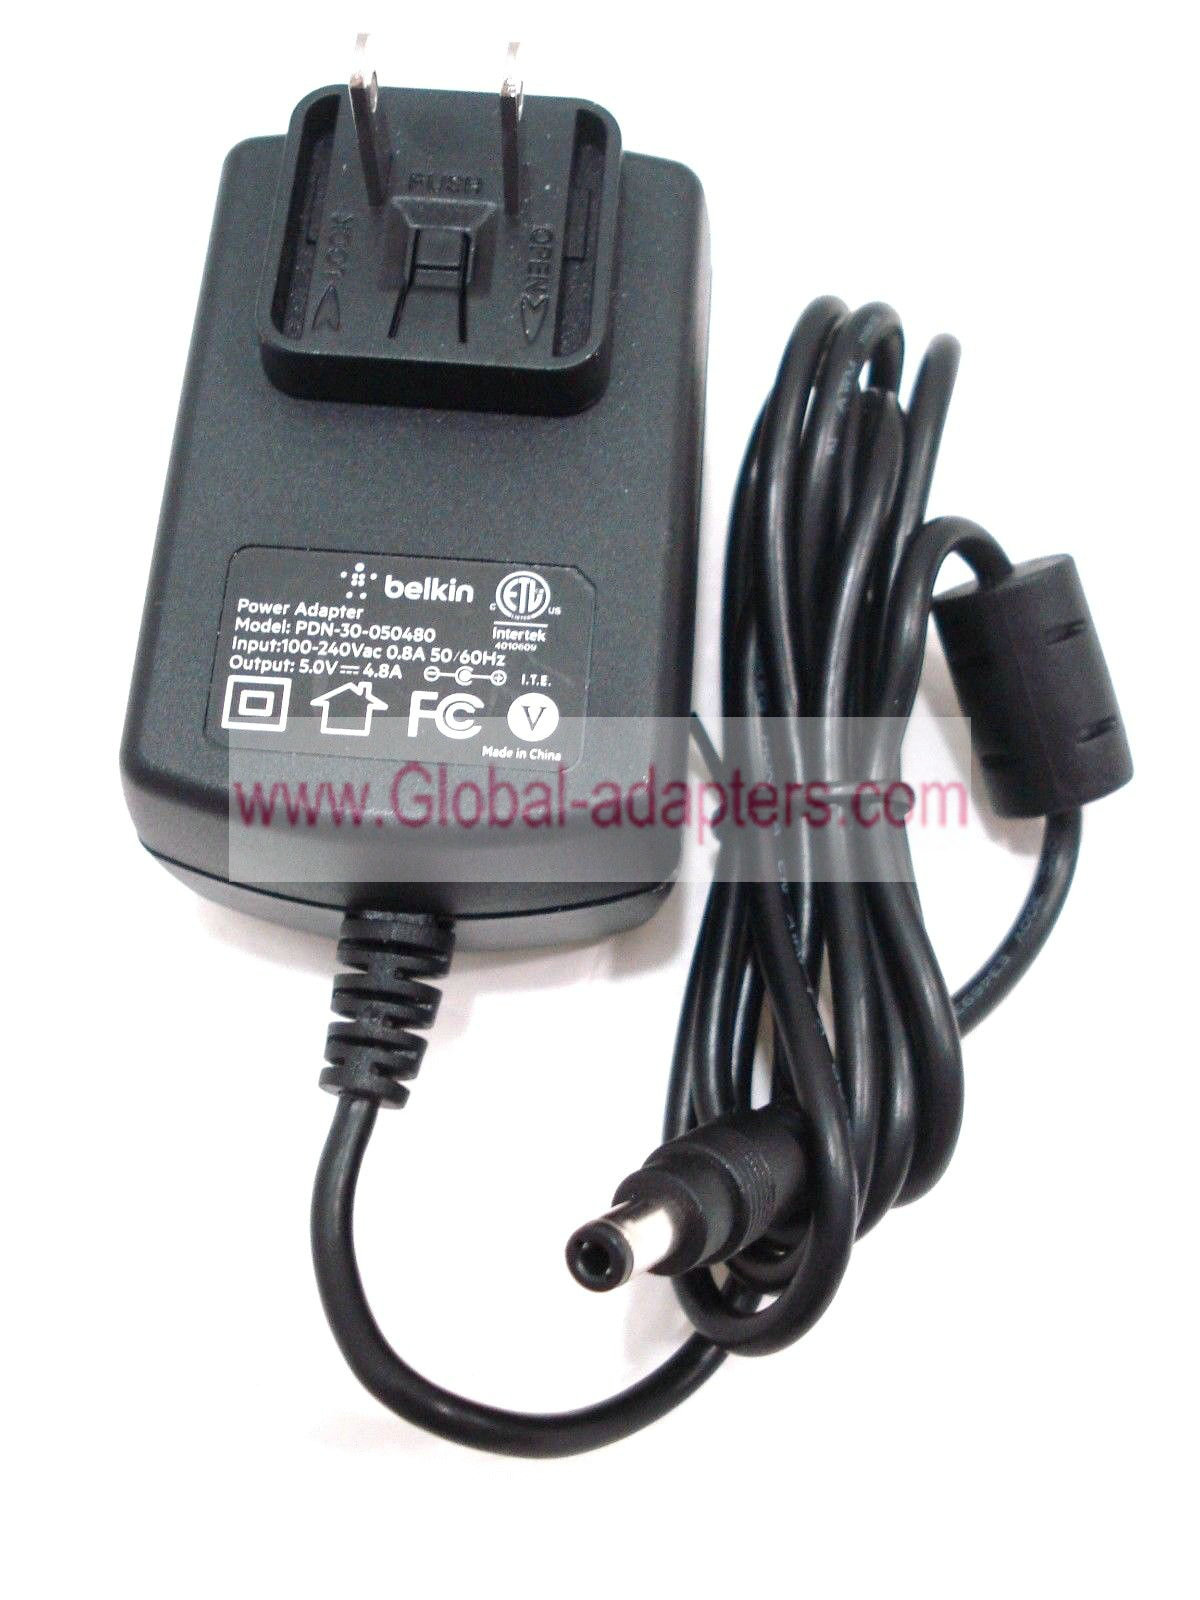 Genuine Belkin 5V 4.8A AC Adapter PDN-30-050480 Power CHARGER New - Click Image to Close